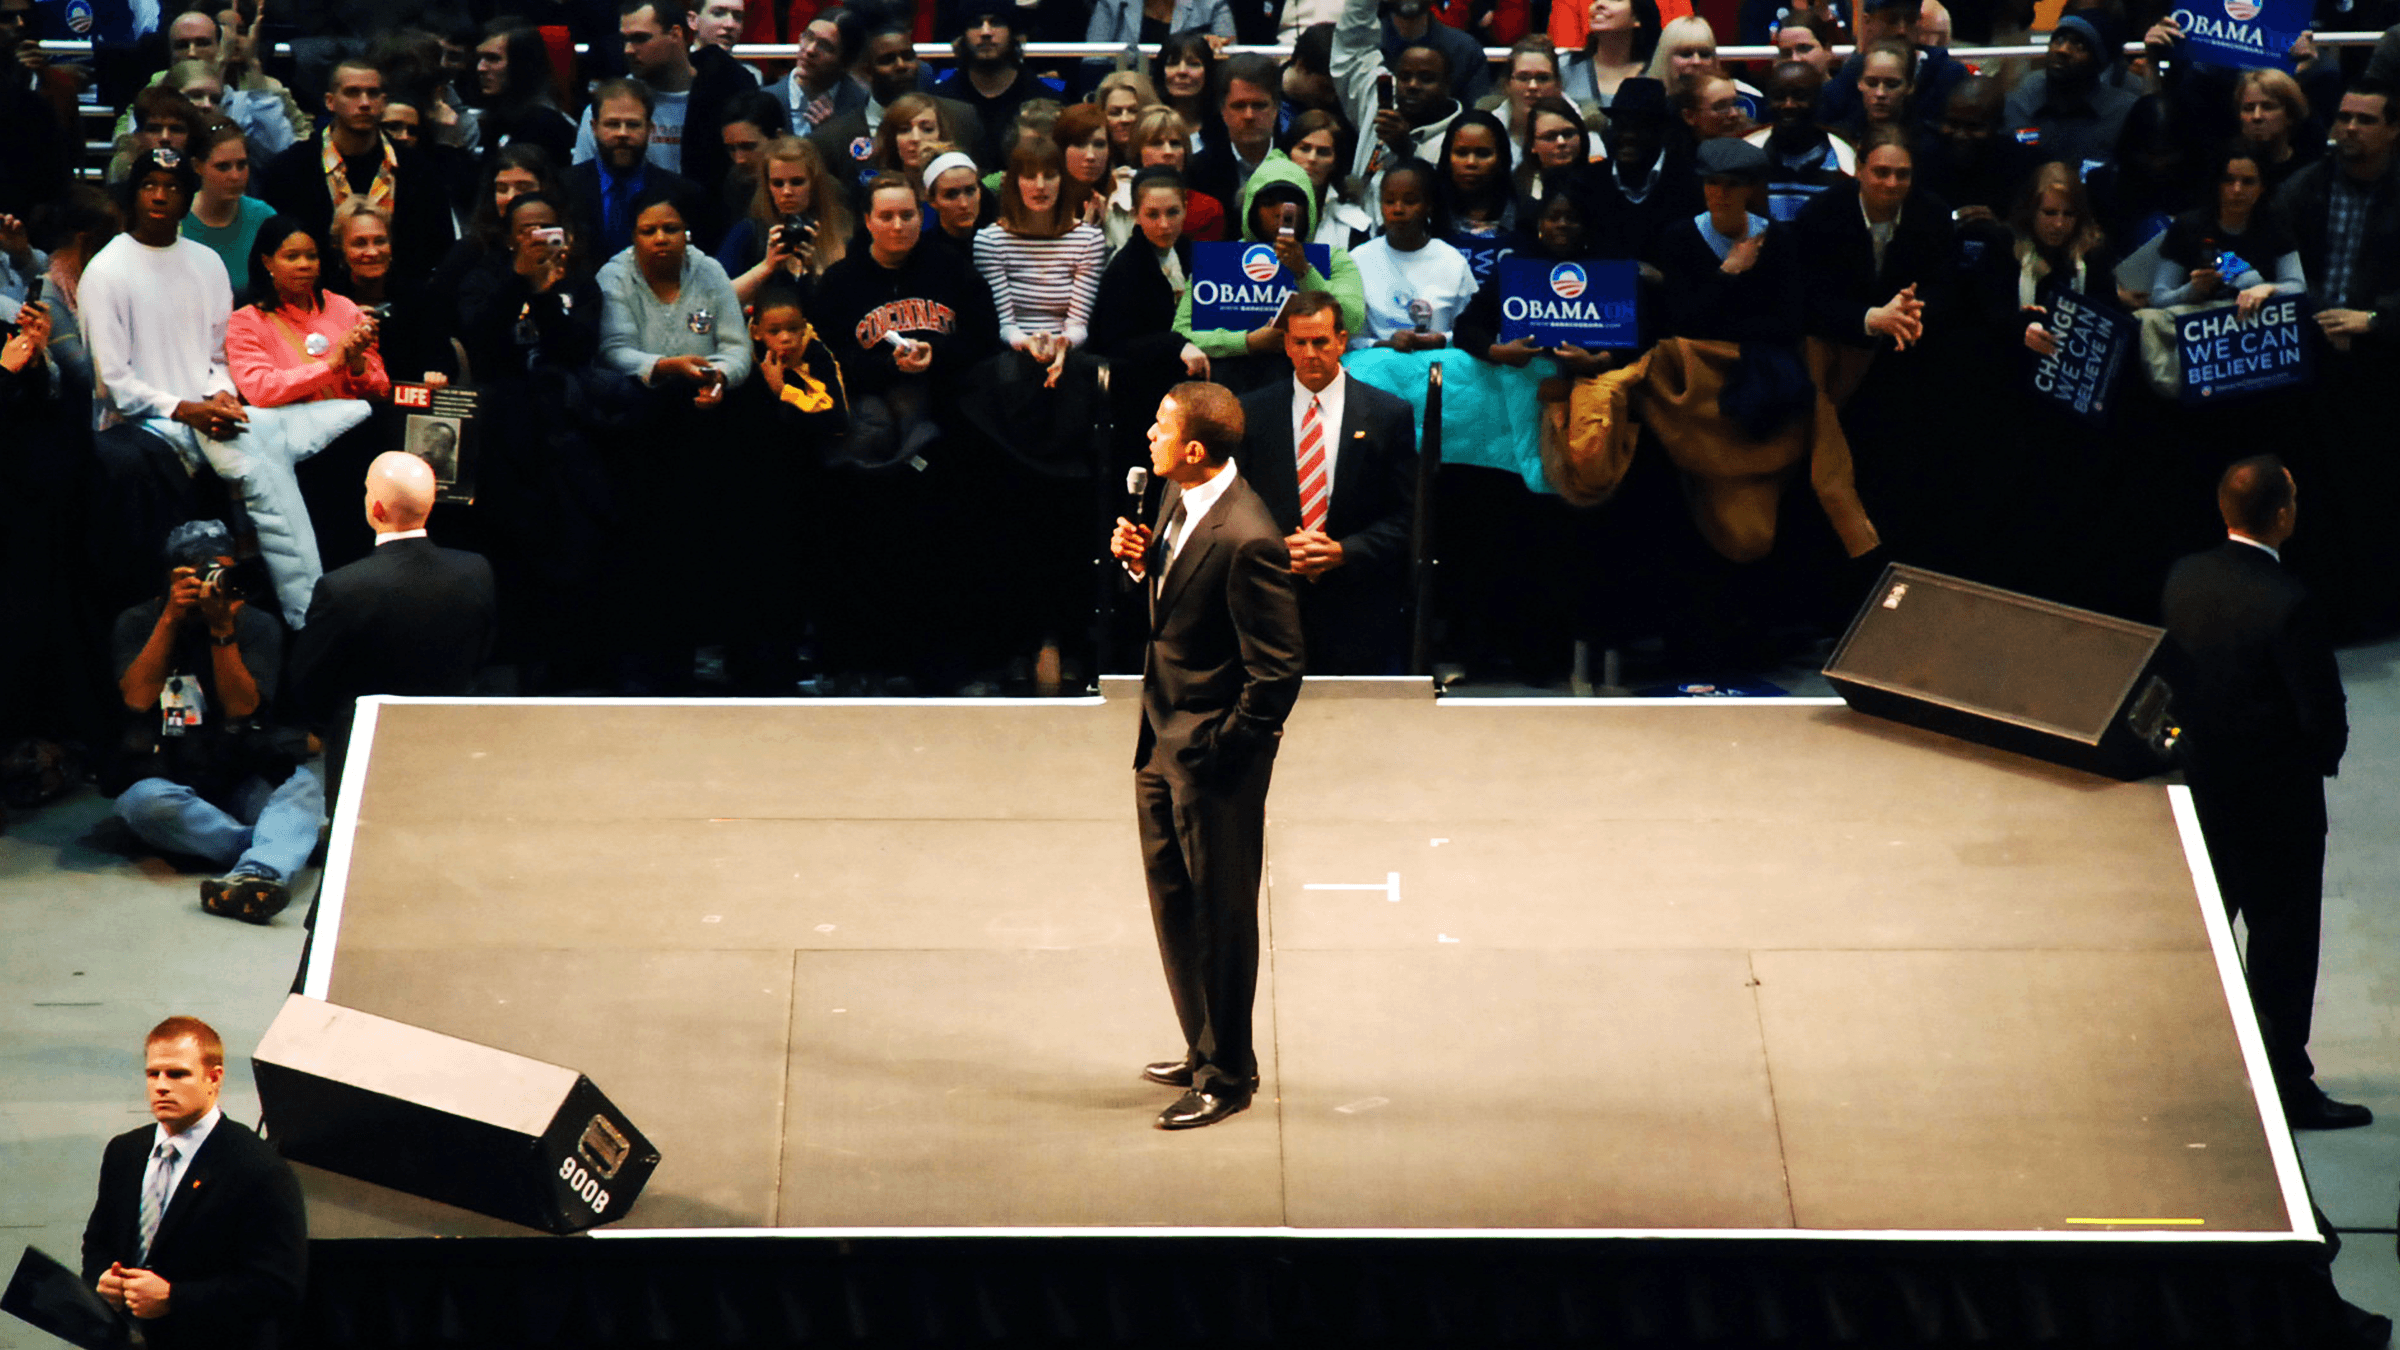 Barack Obama speaking at an event in 2009